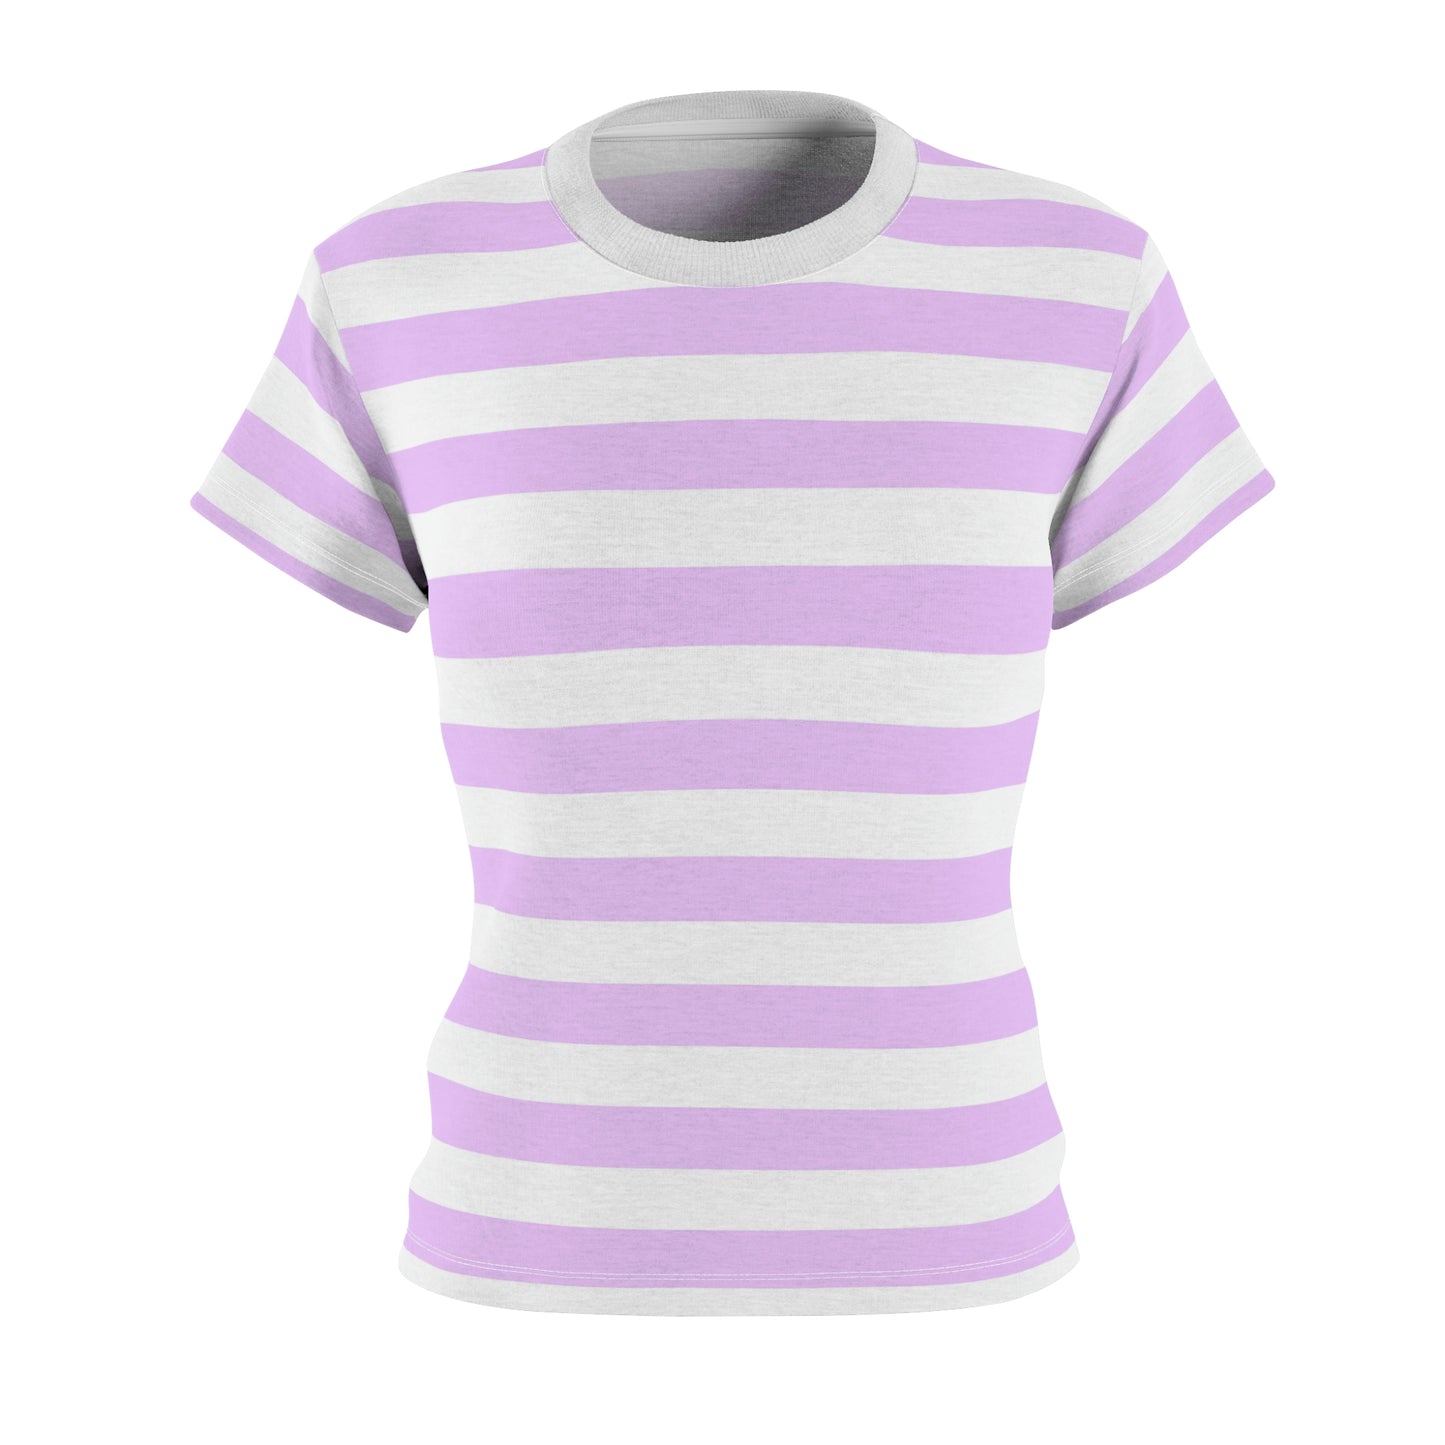 Purple and White Striped Women Tshirt, Vintage Retro Designer Adult Graphic Aesthetic Fashion Fitted Crewneck Tee Shirt Top